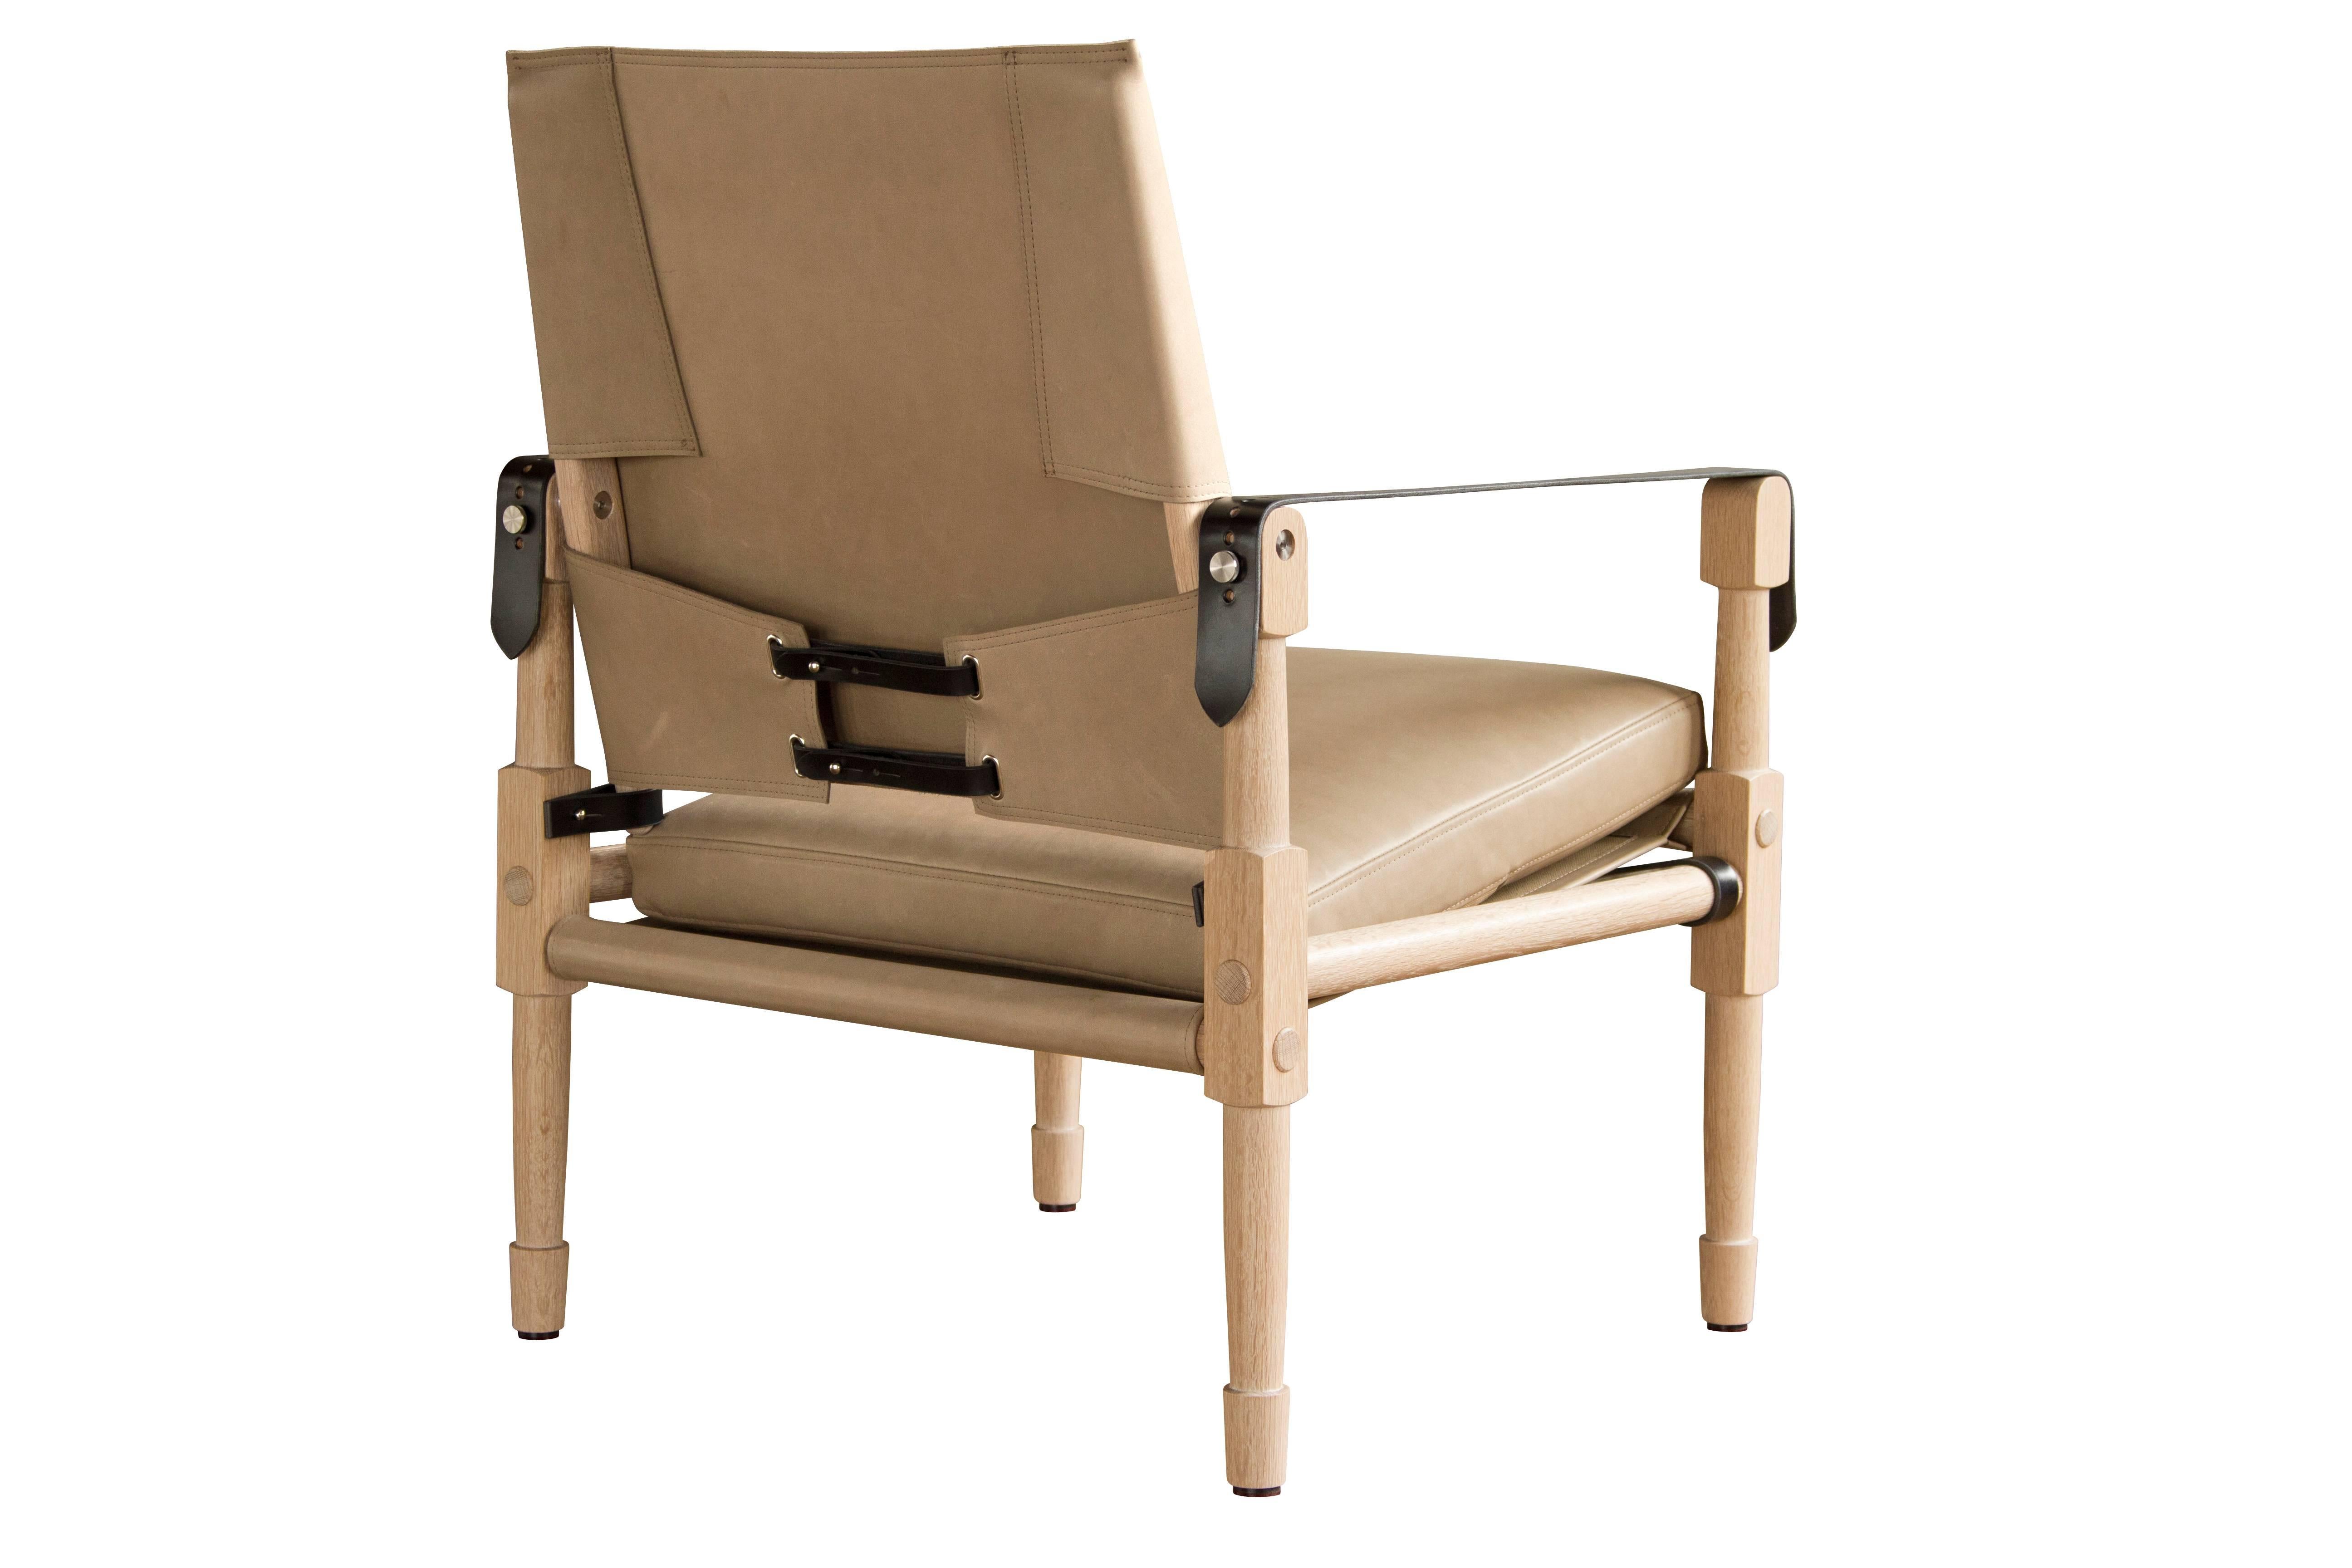 The Grand Chatwin Lounge Chair, in bleached white oak with Moore and Giles: Valhalla / Burlap leather upholstery and black English bridle leather strapping.

The modern campaign collection by Richard Wrightman combines the vernacular of traditional